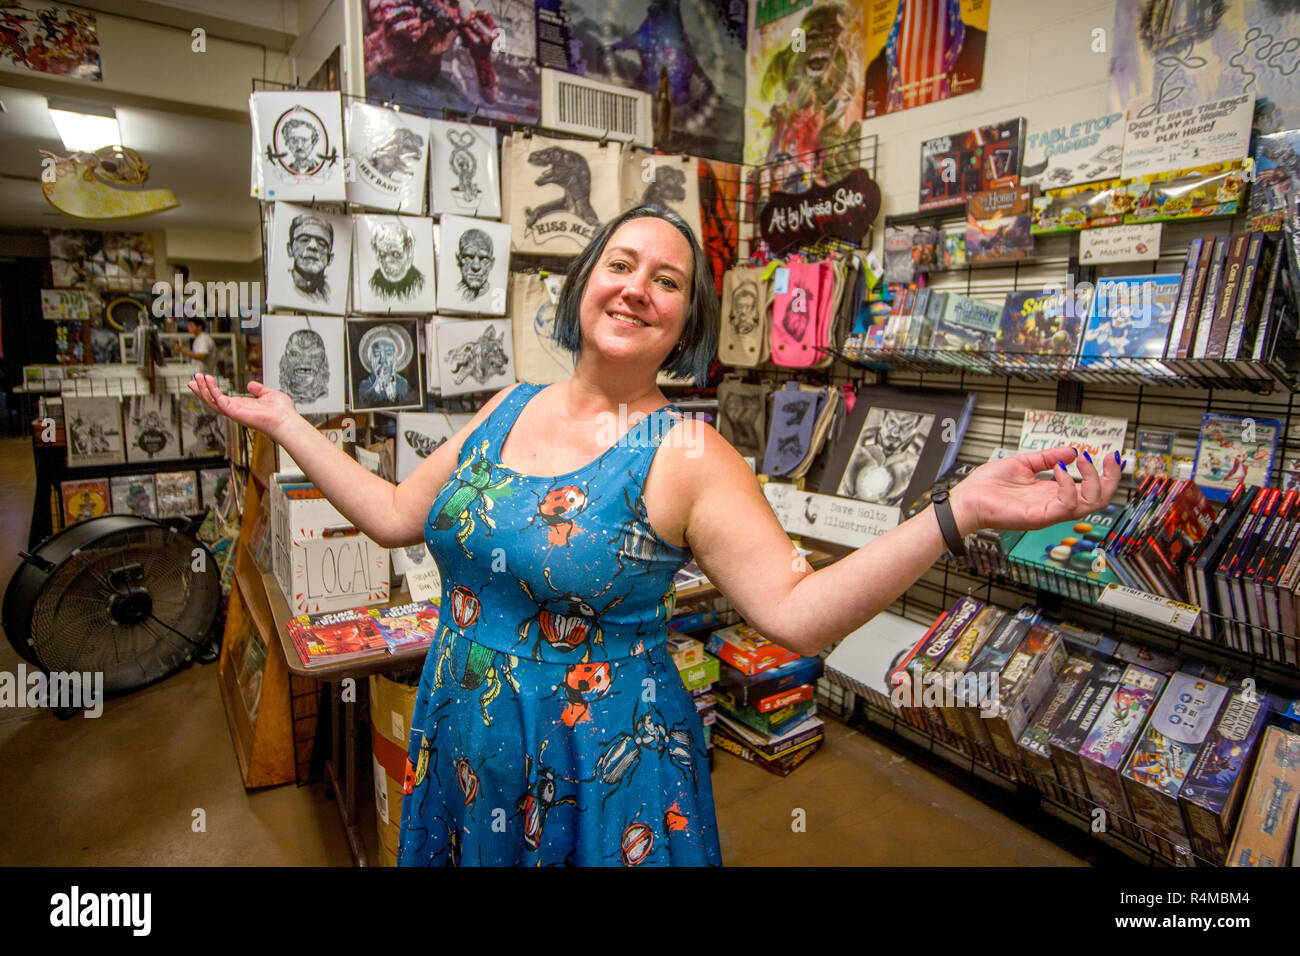 The proprietor of a comic book art shop in Fullerton, CA, proudly shows off display racks of her inventory. Stock Photo